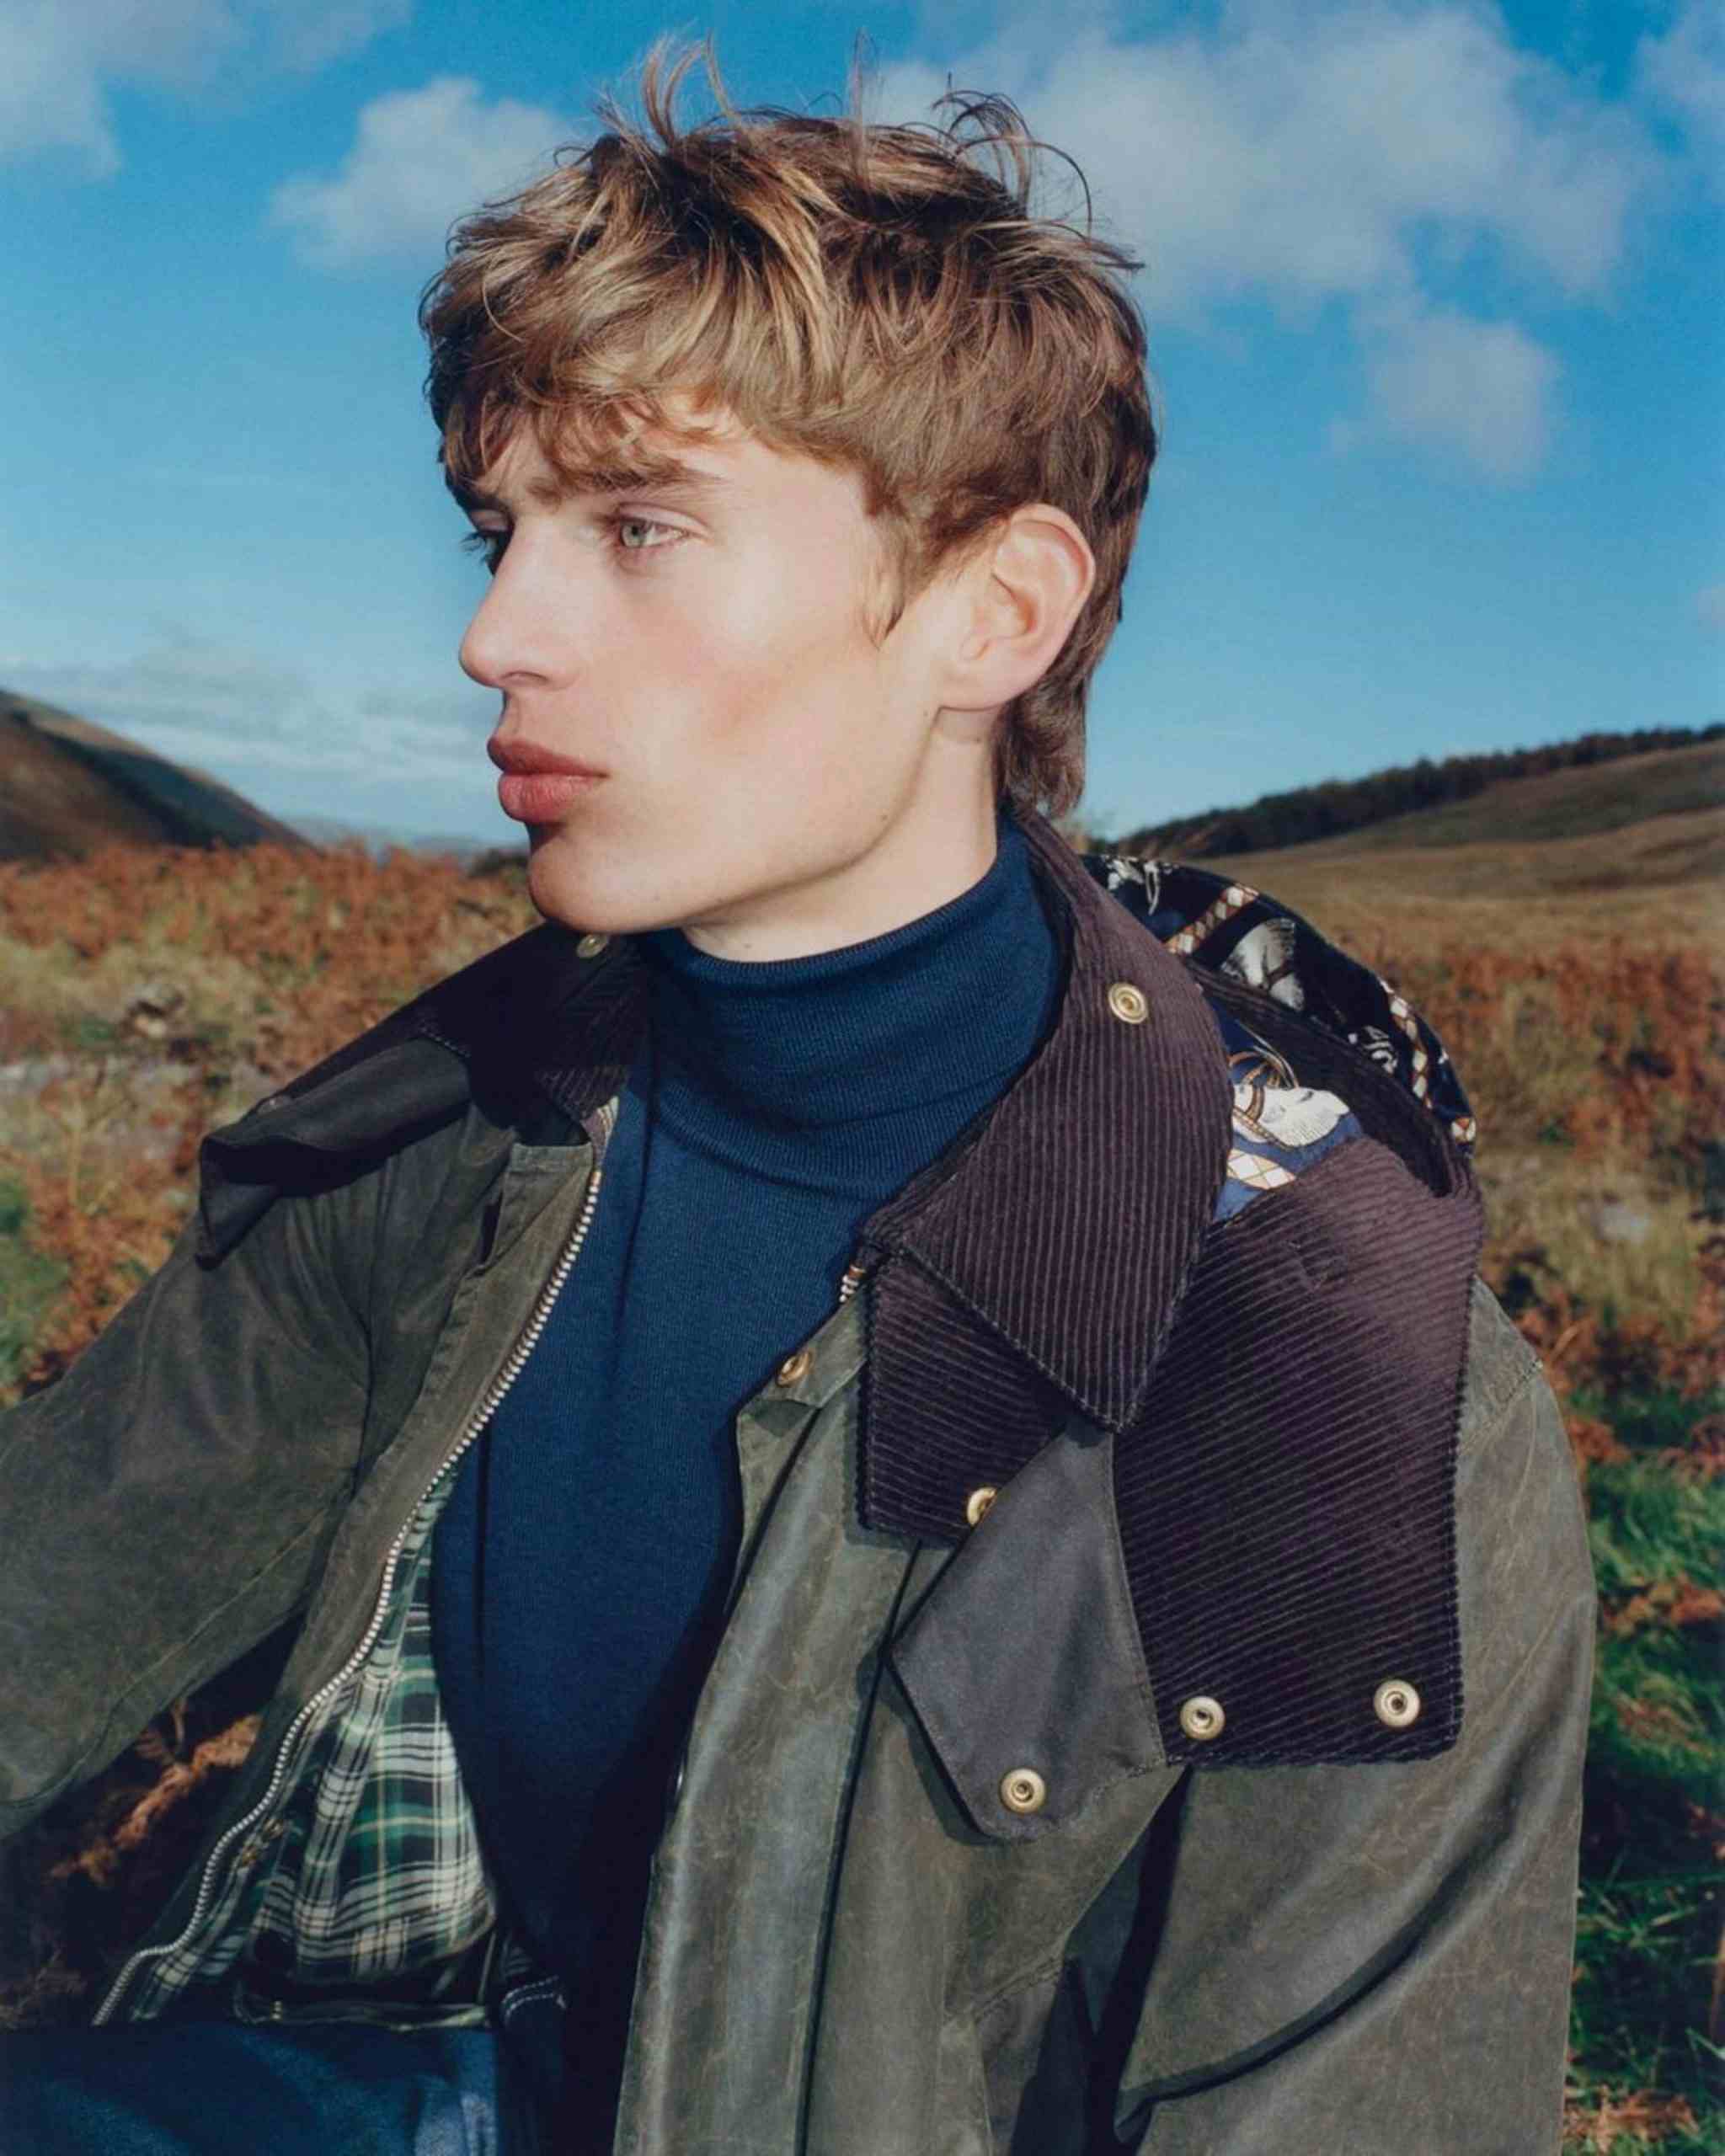 GUCCI - Barbour Re-Loved × Gucci Continuum Collection
Photographer: Osma Harvilahti
Stylist: Luca Galasso
Location: North England